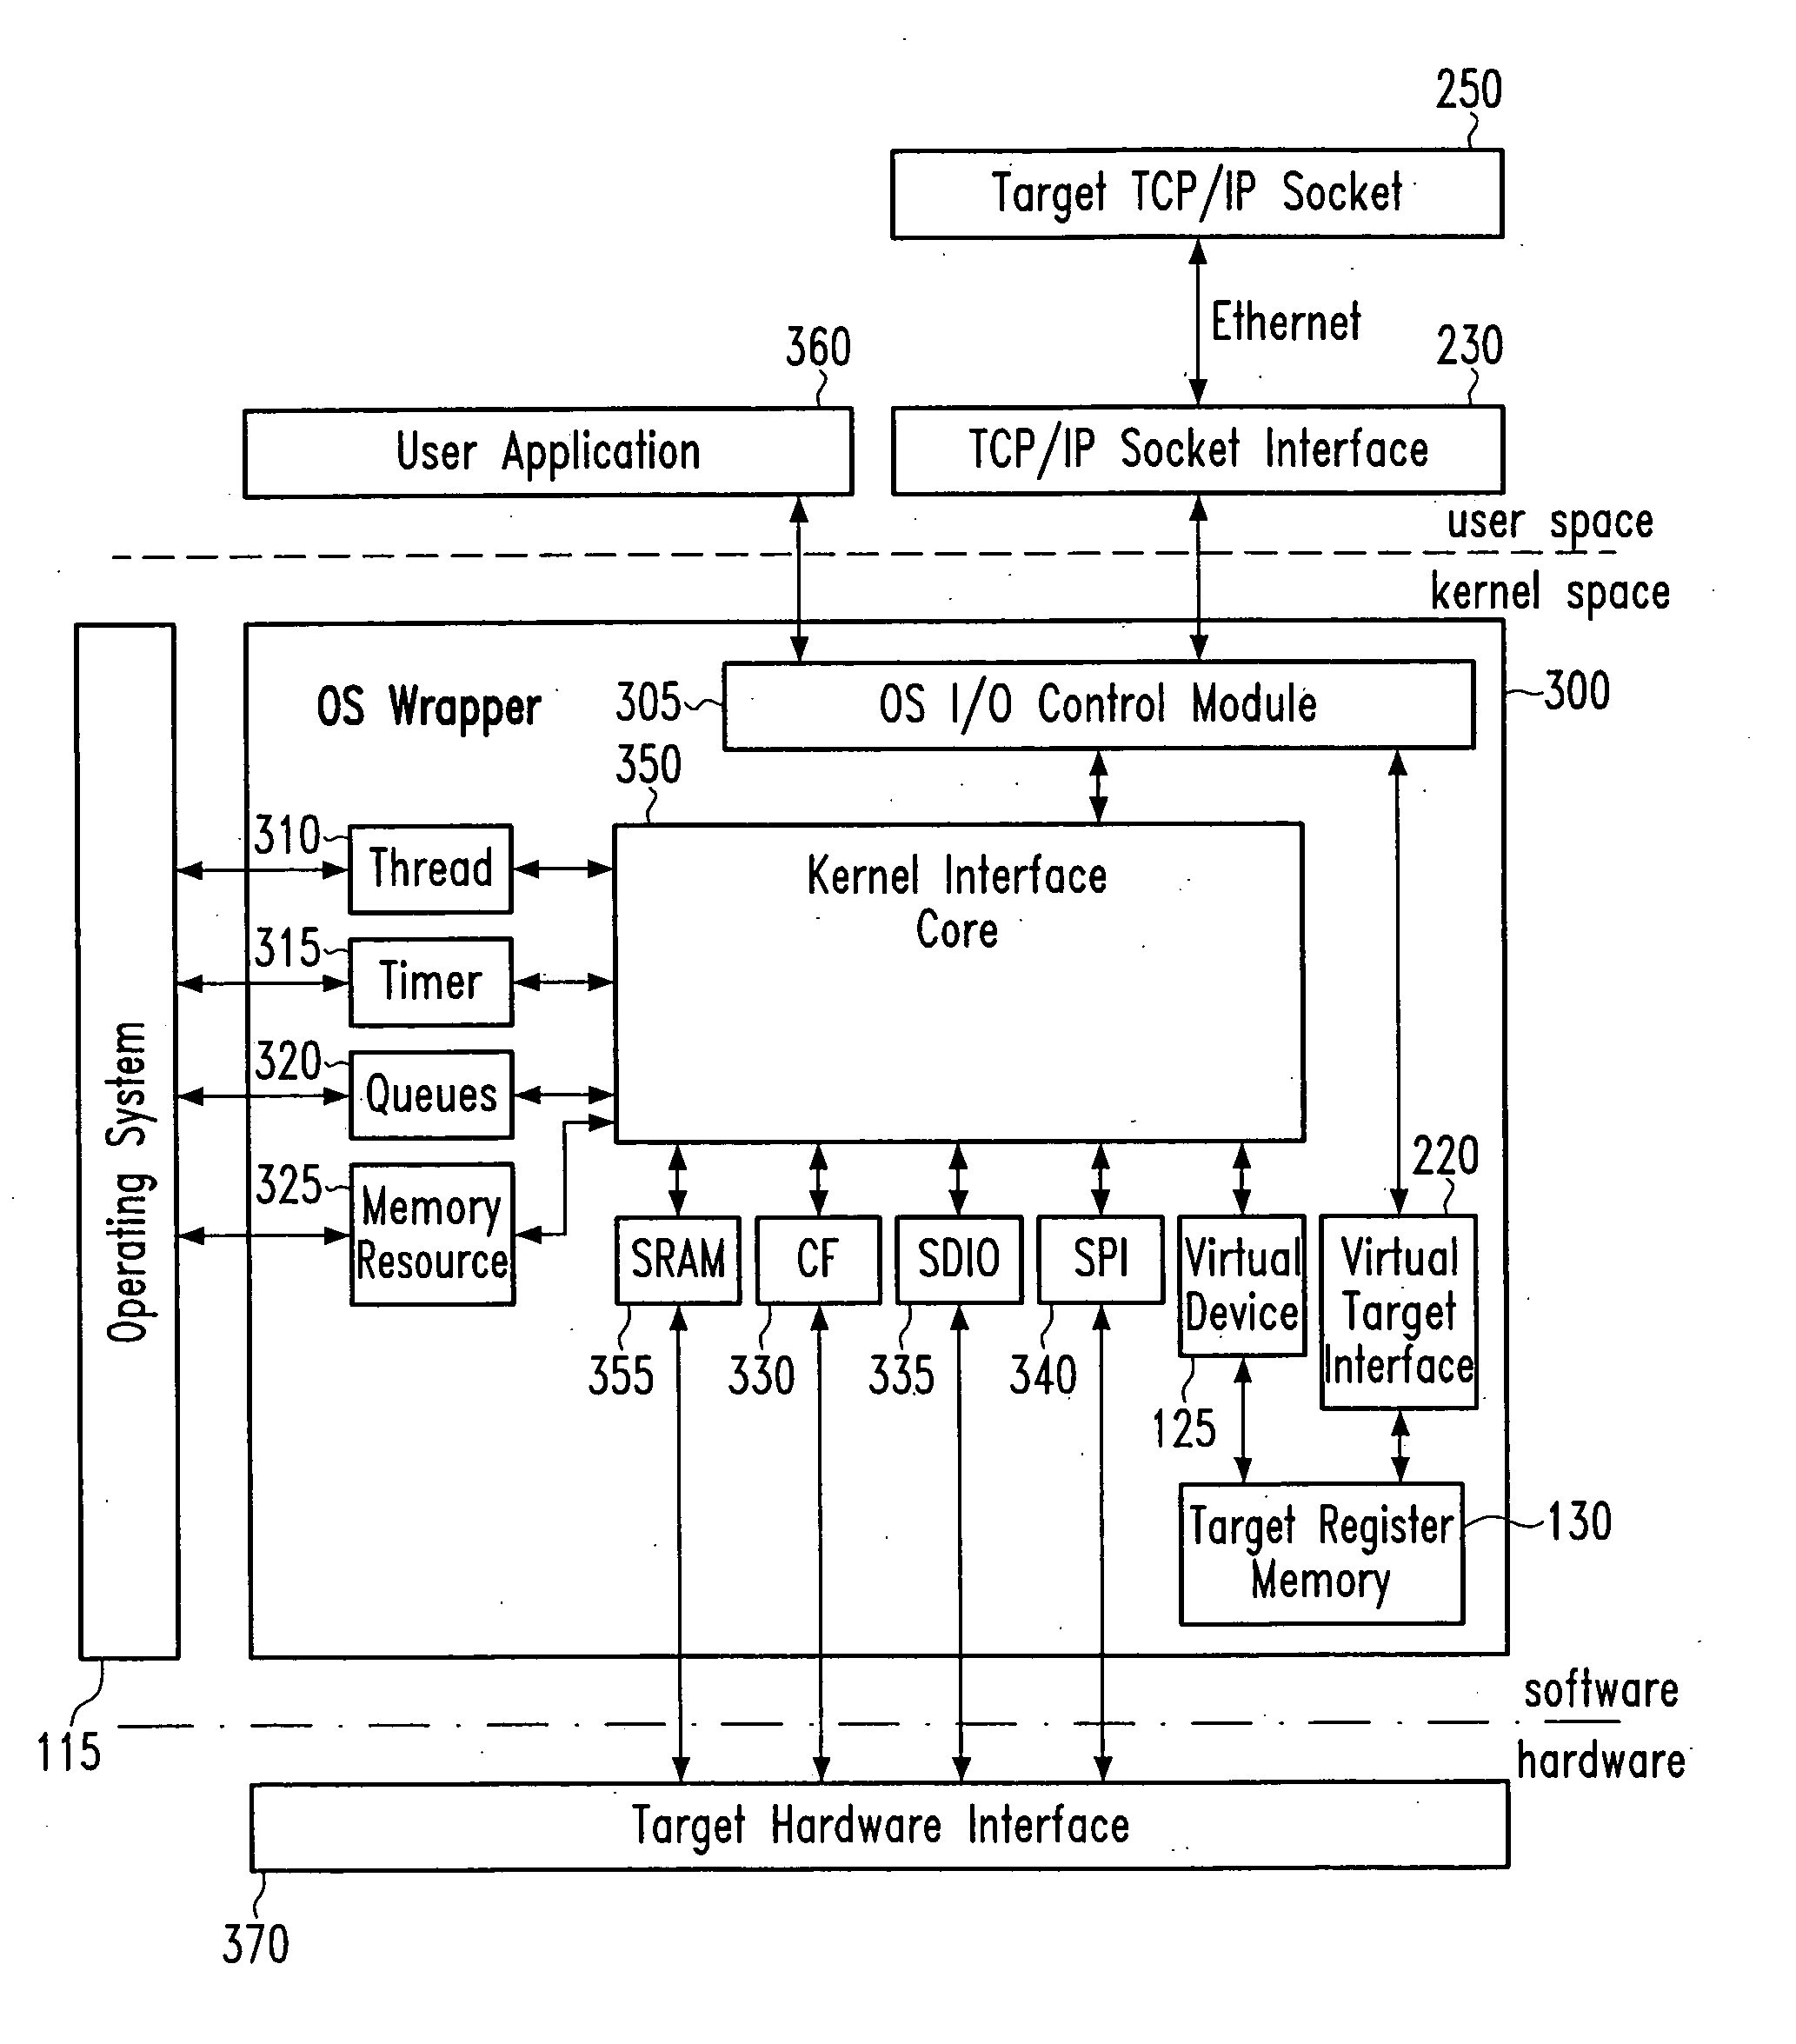 Memory access to virtual target device